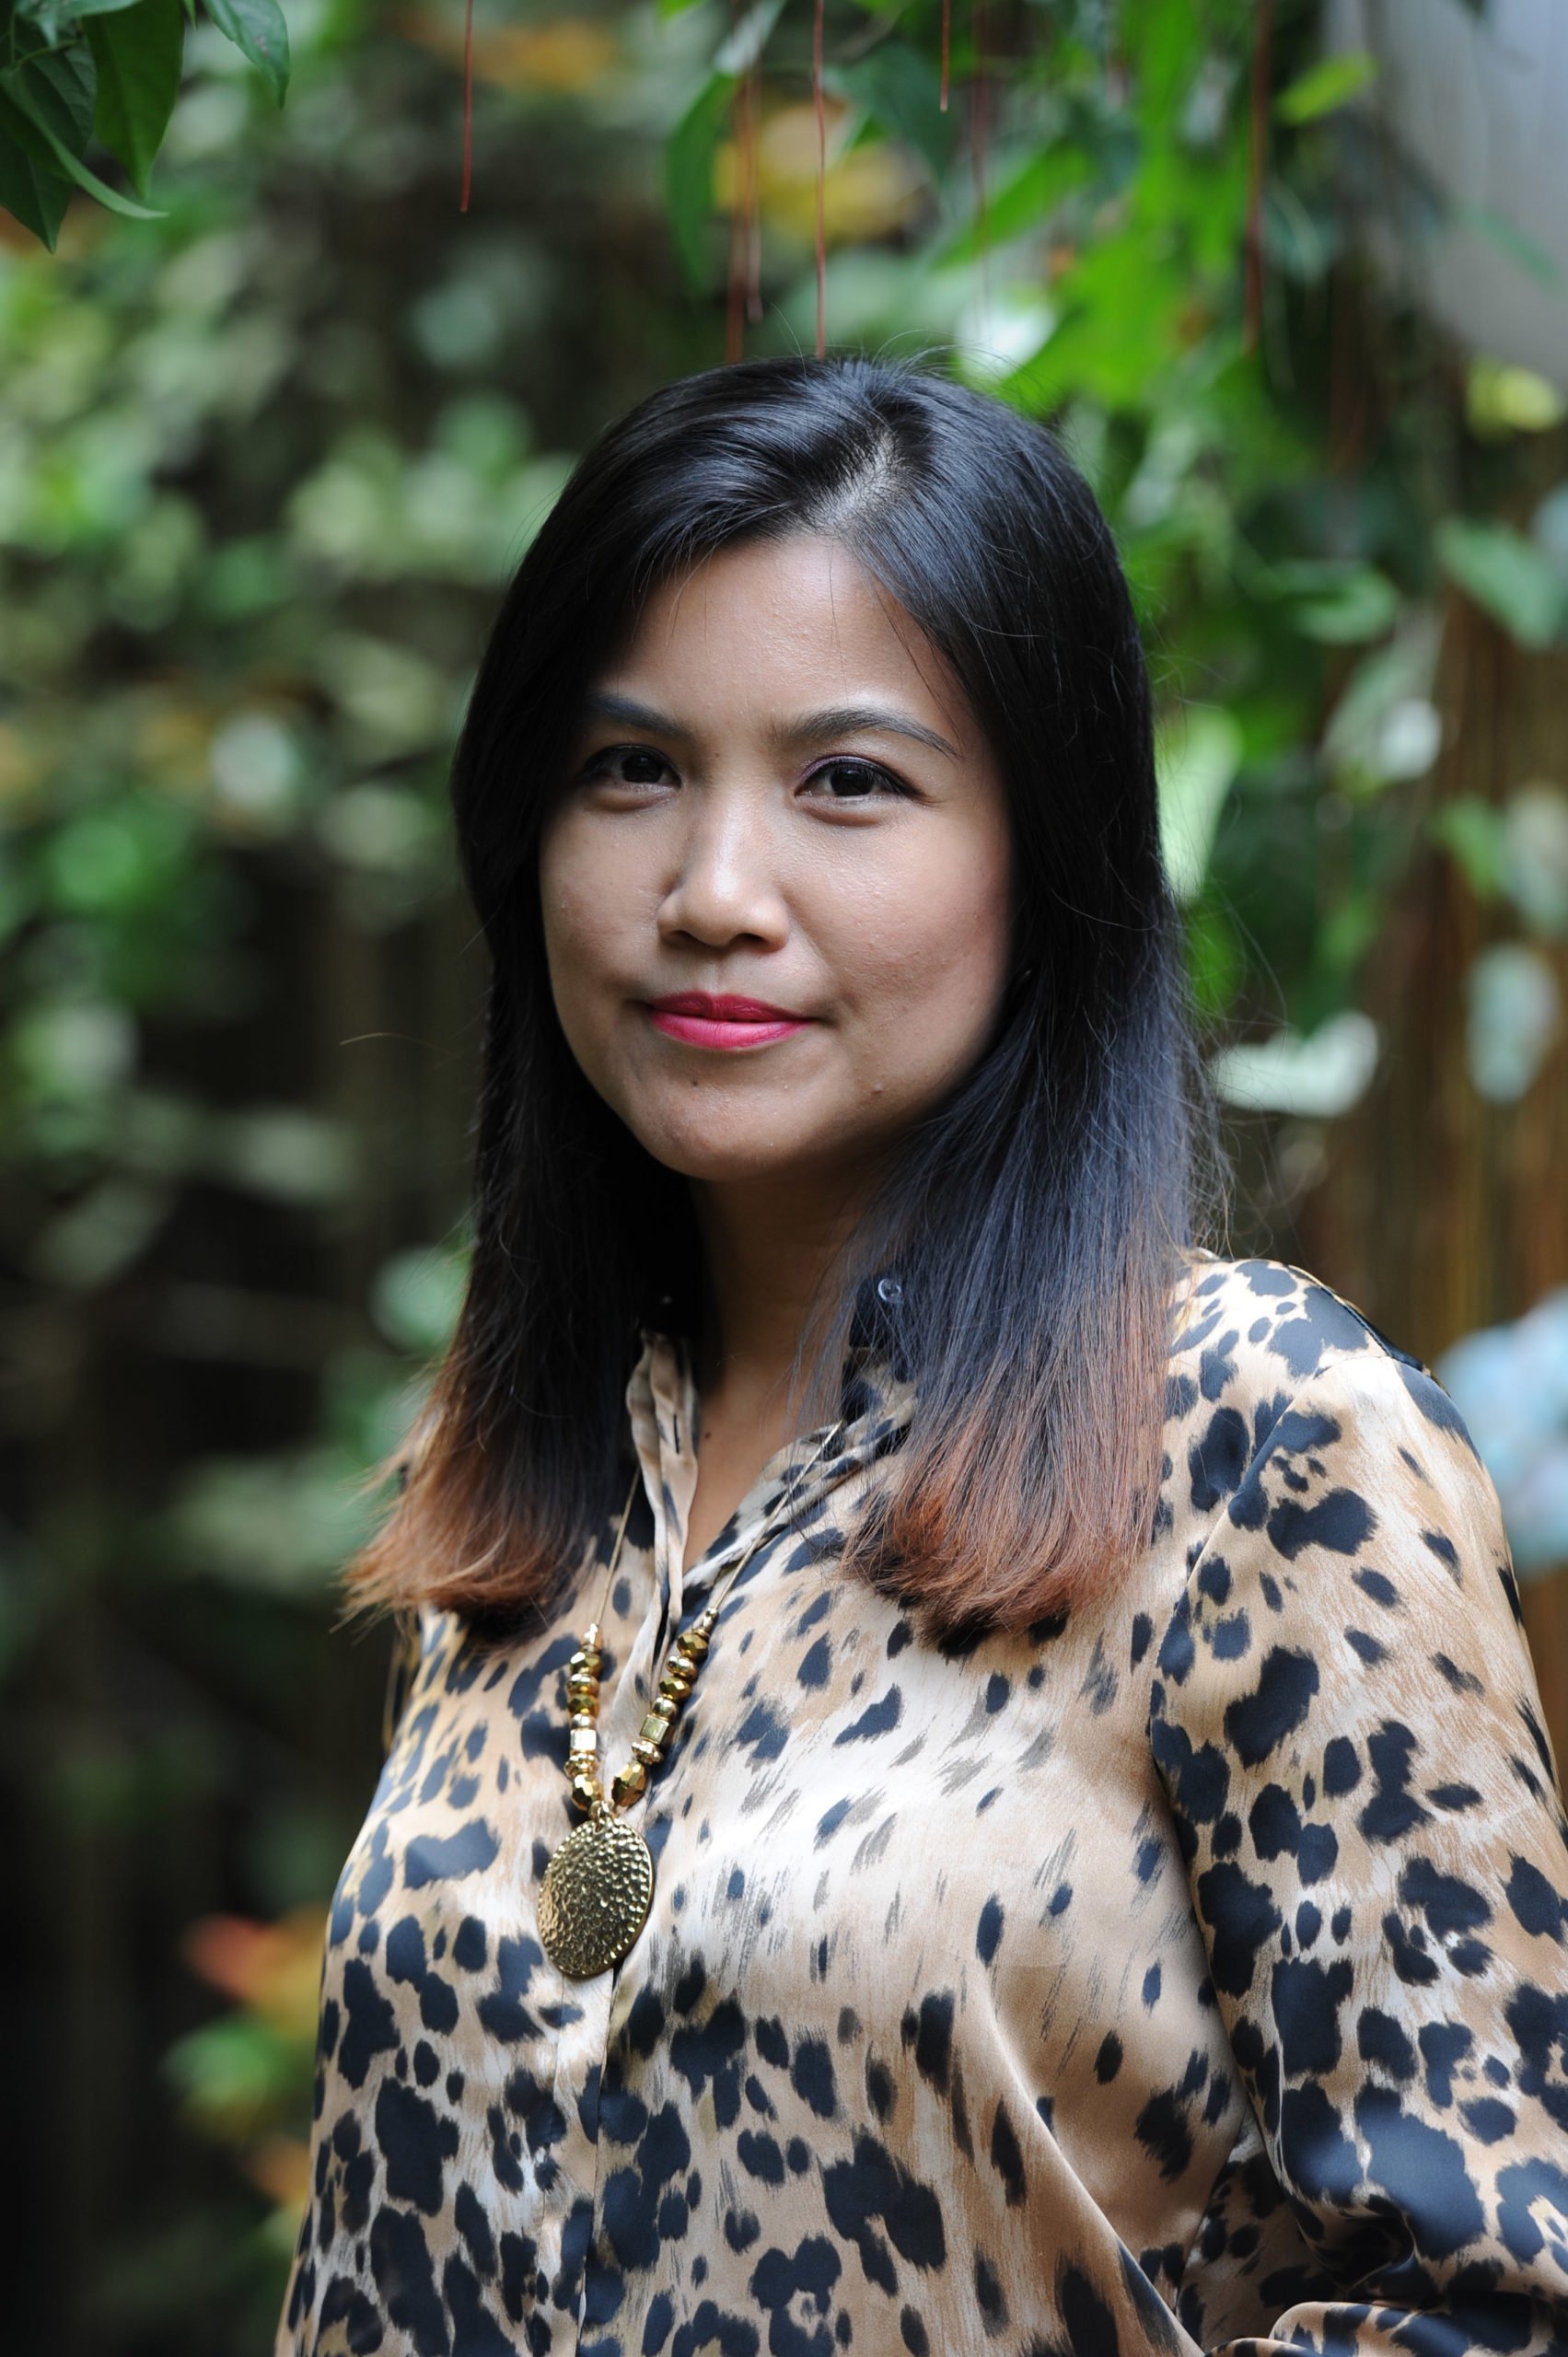 Nida Hamid runs an event management company in Malaysia and was a mentee on the Mentoring Women in Business programme.